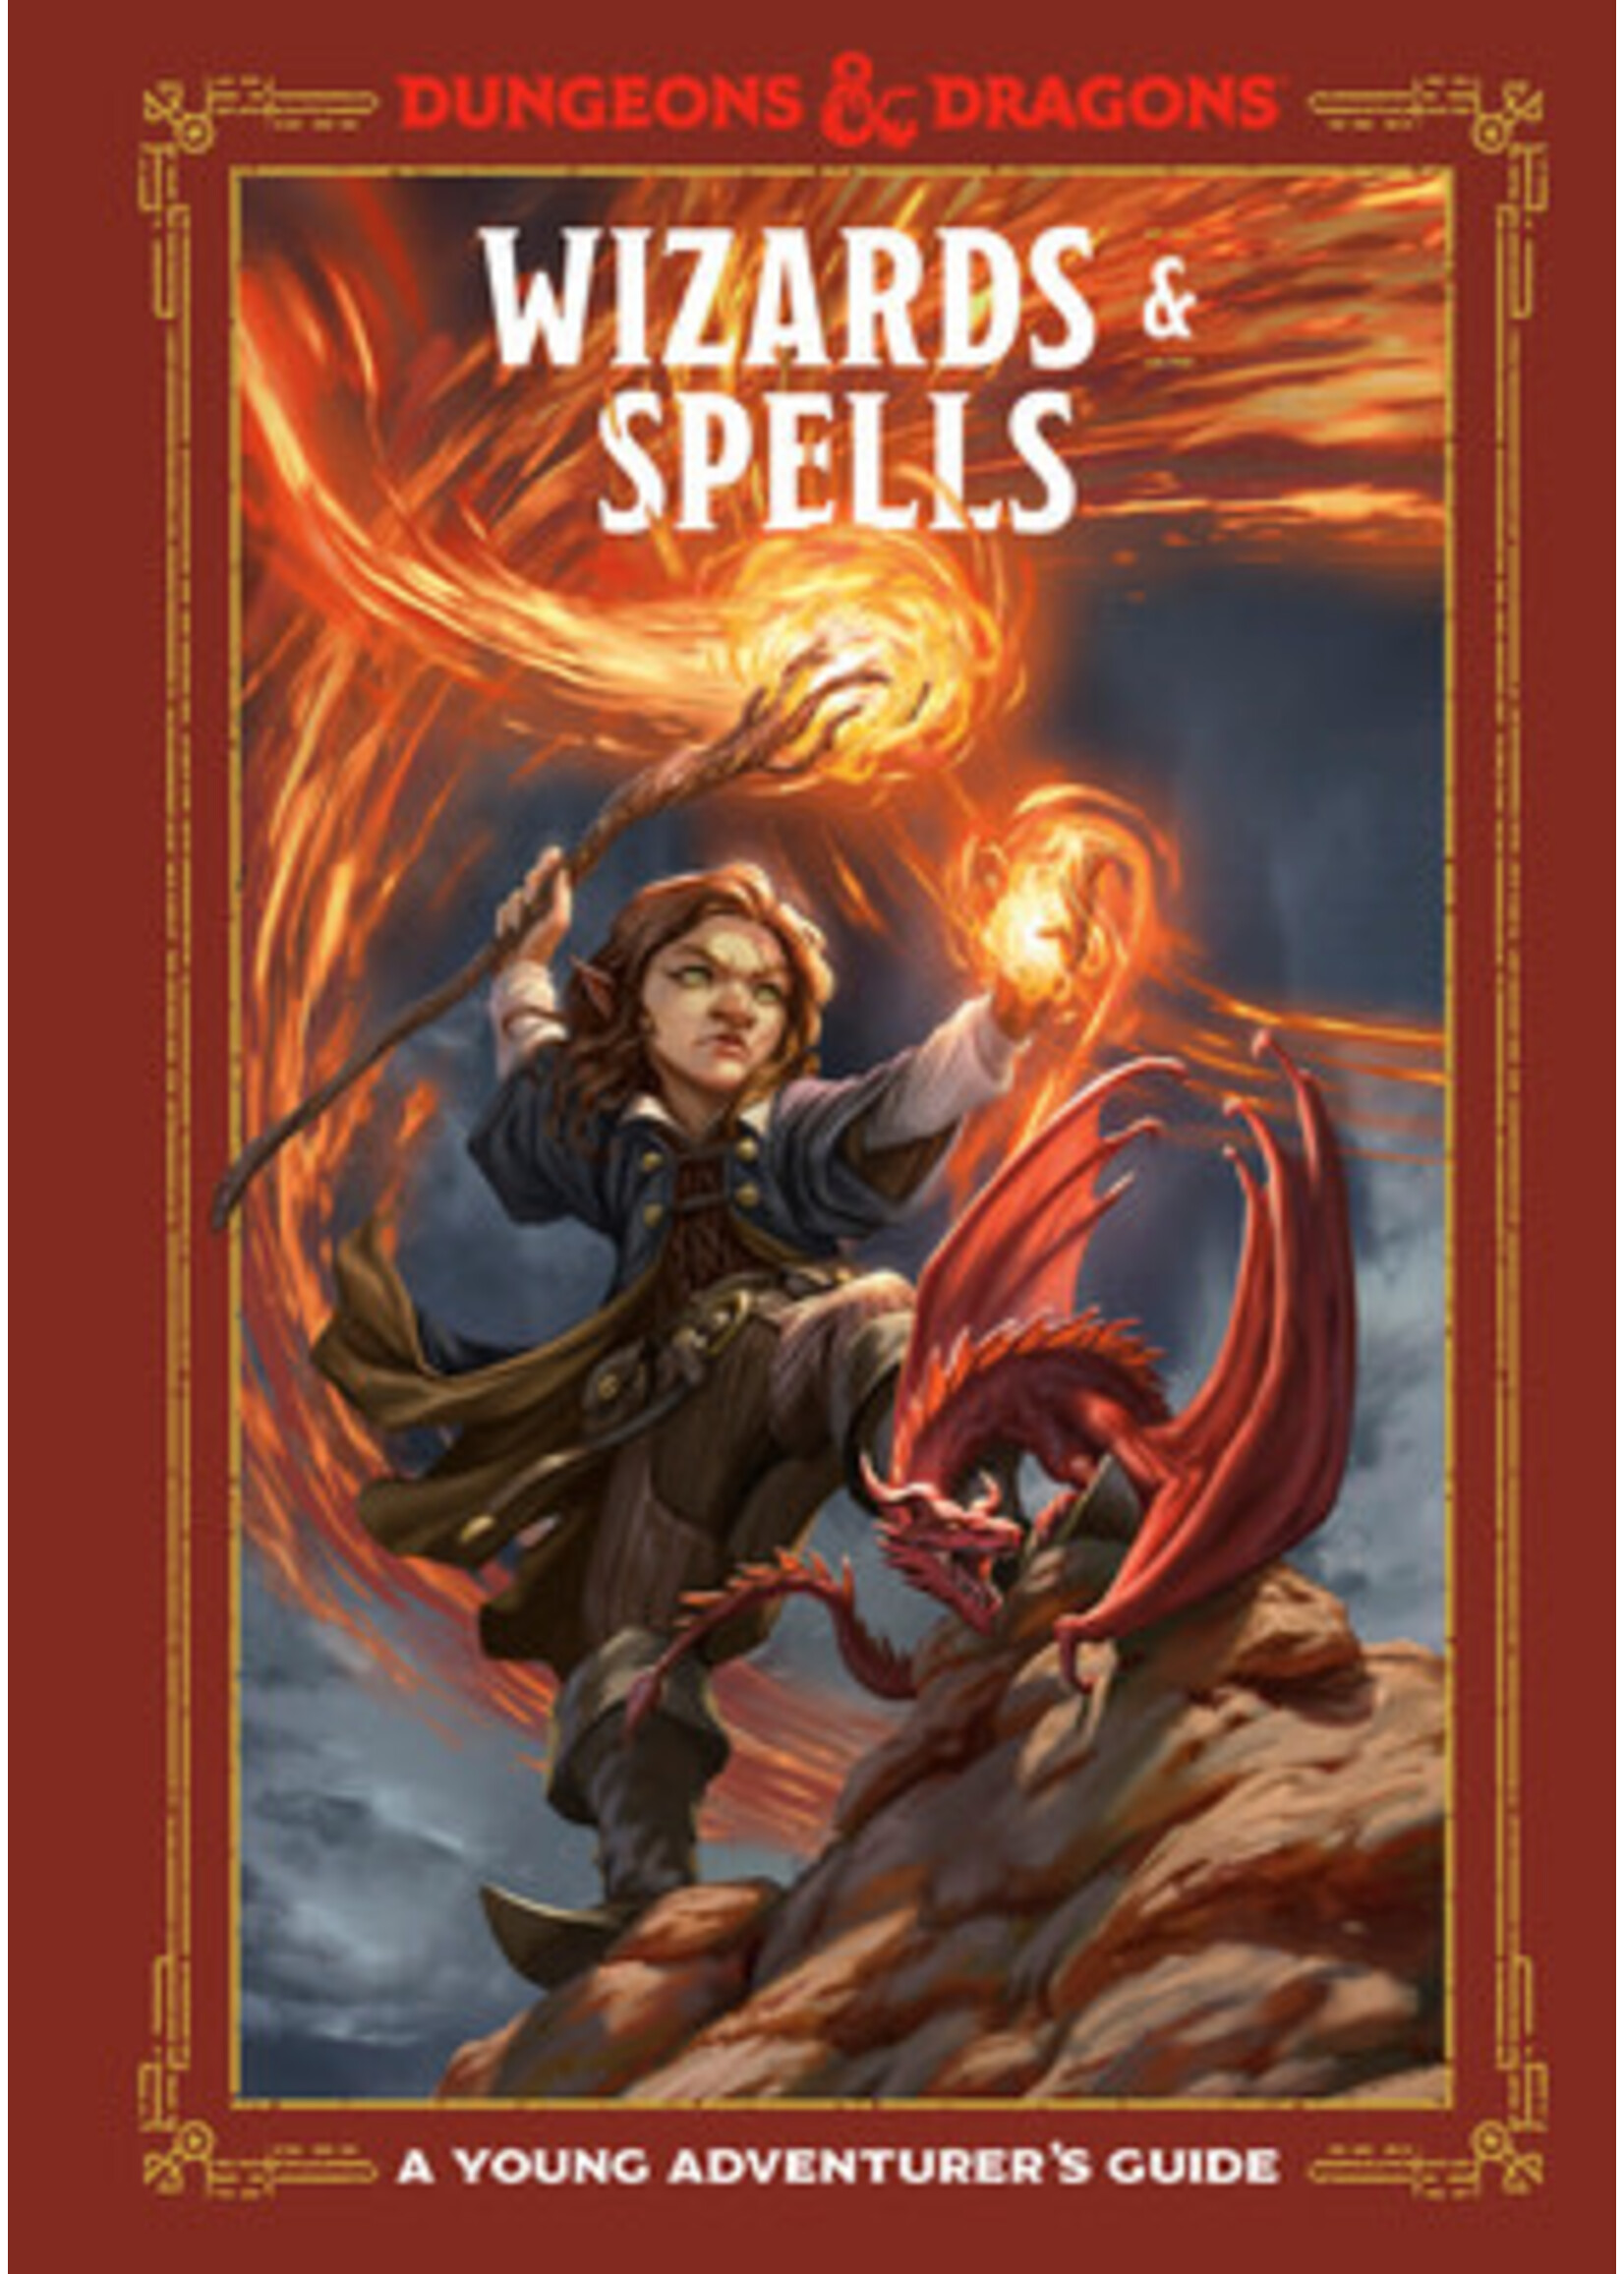 Wizards and Spells: A Young Adventurer's Guide by Dungeons & Dragons